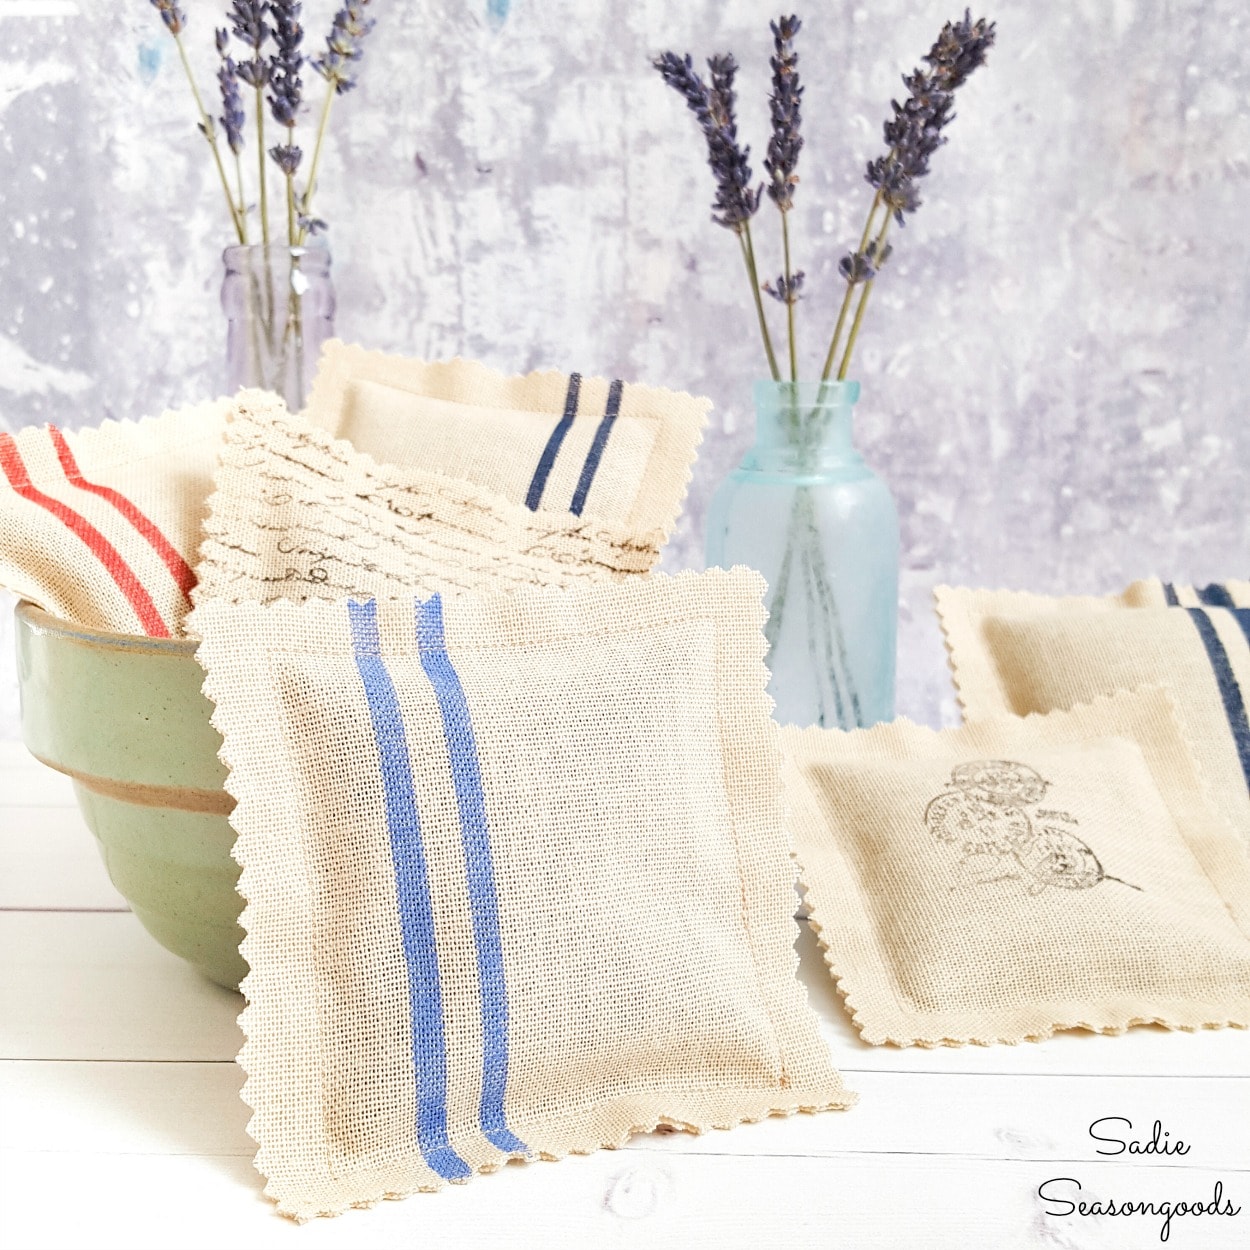 Faking the Look of Grain Sack Fabric for DIY Lavender Sachets